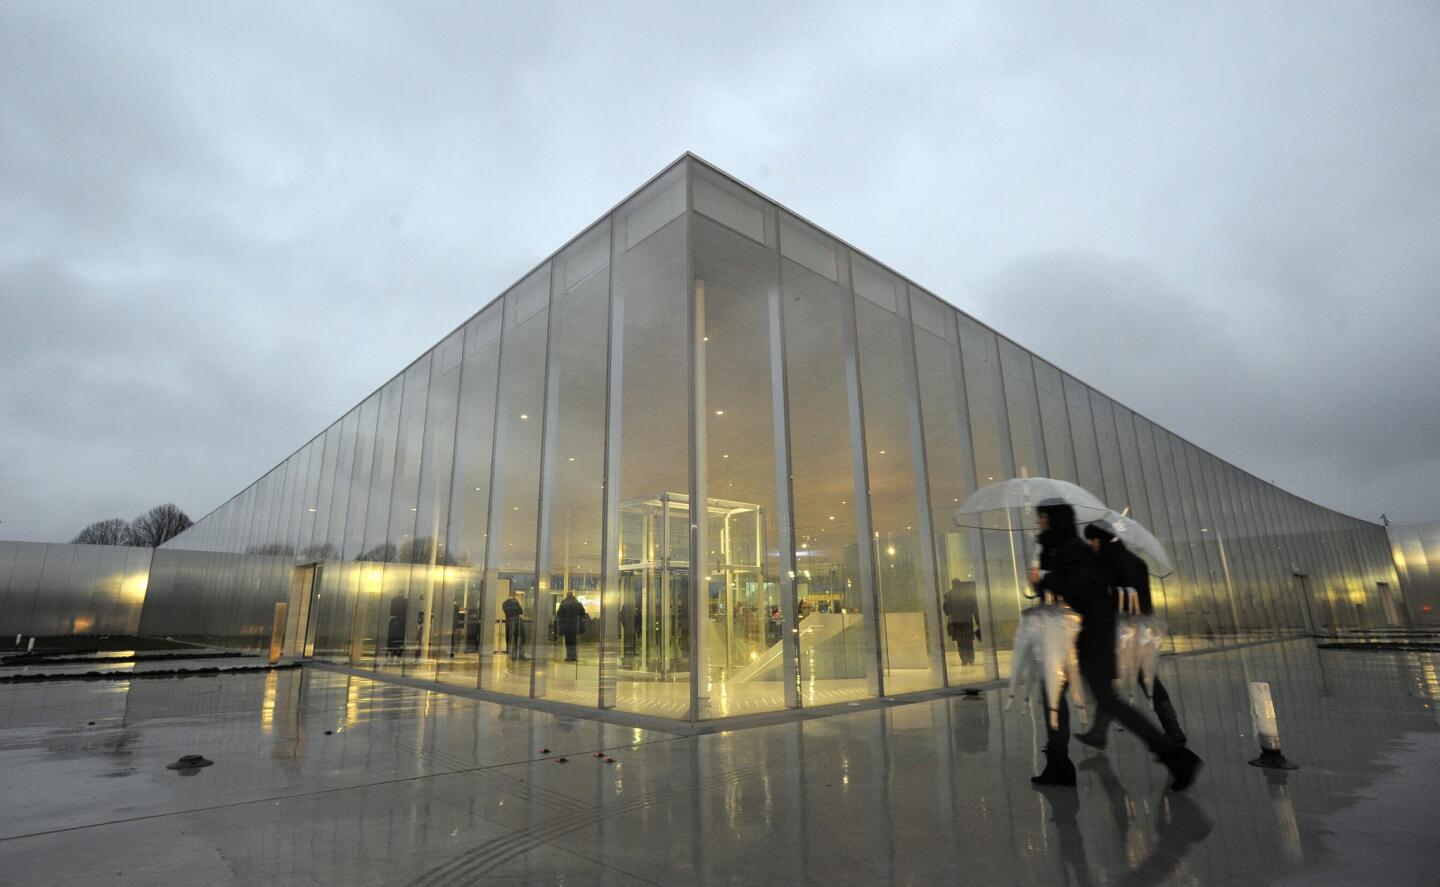 The Louvre Lens Museum, in Lens, France, is the work of Japanese architects Kazuyo Sejima and Ryue Nishizawa, winners of the 2010 Pritzker Prize.